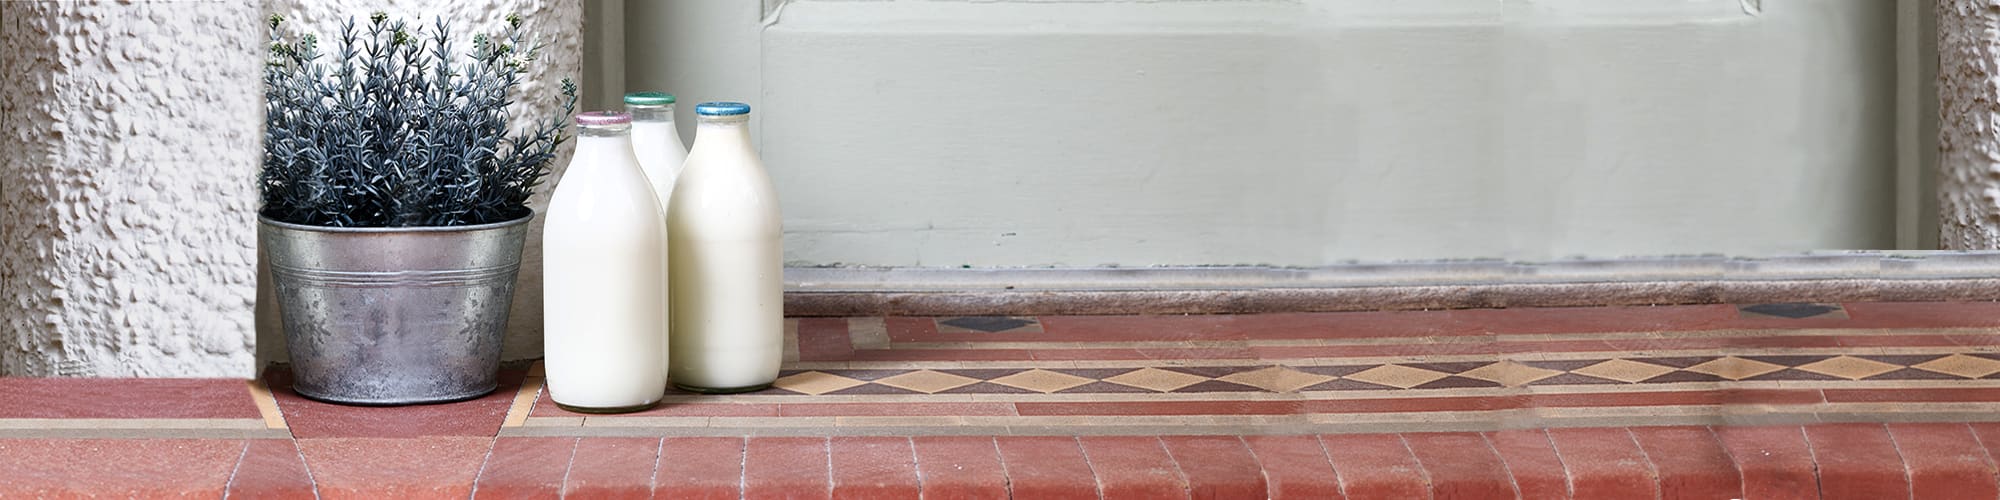 Hassle free deliveries to your door with Milk & More